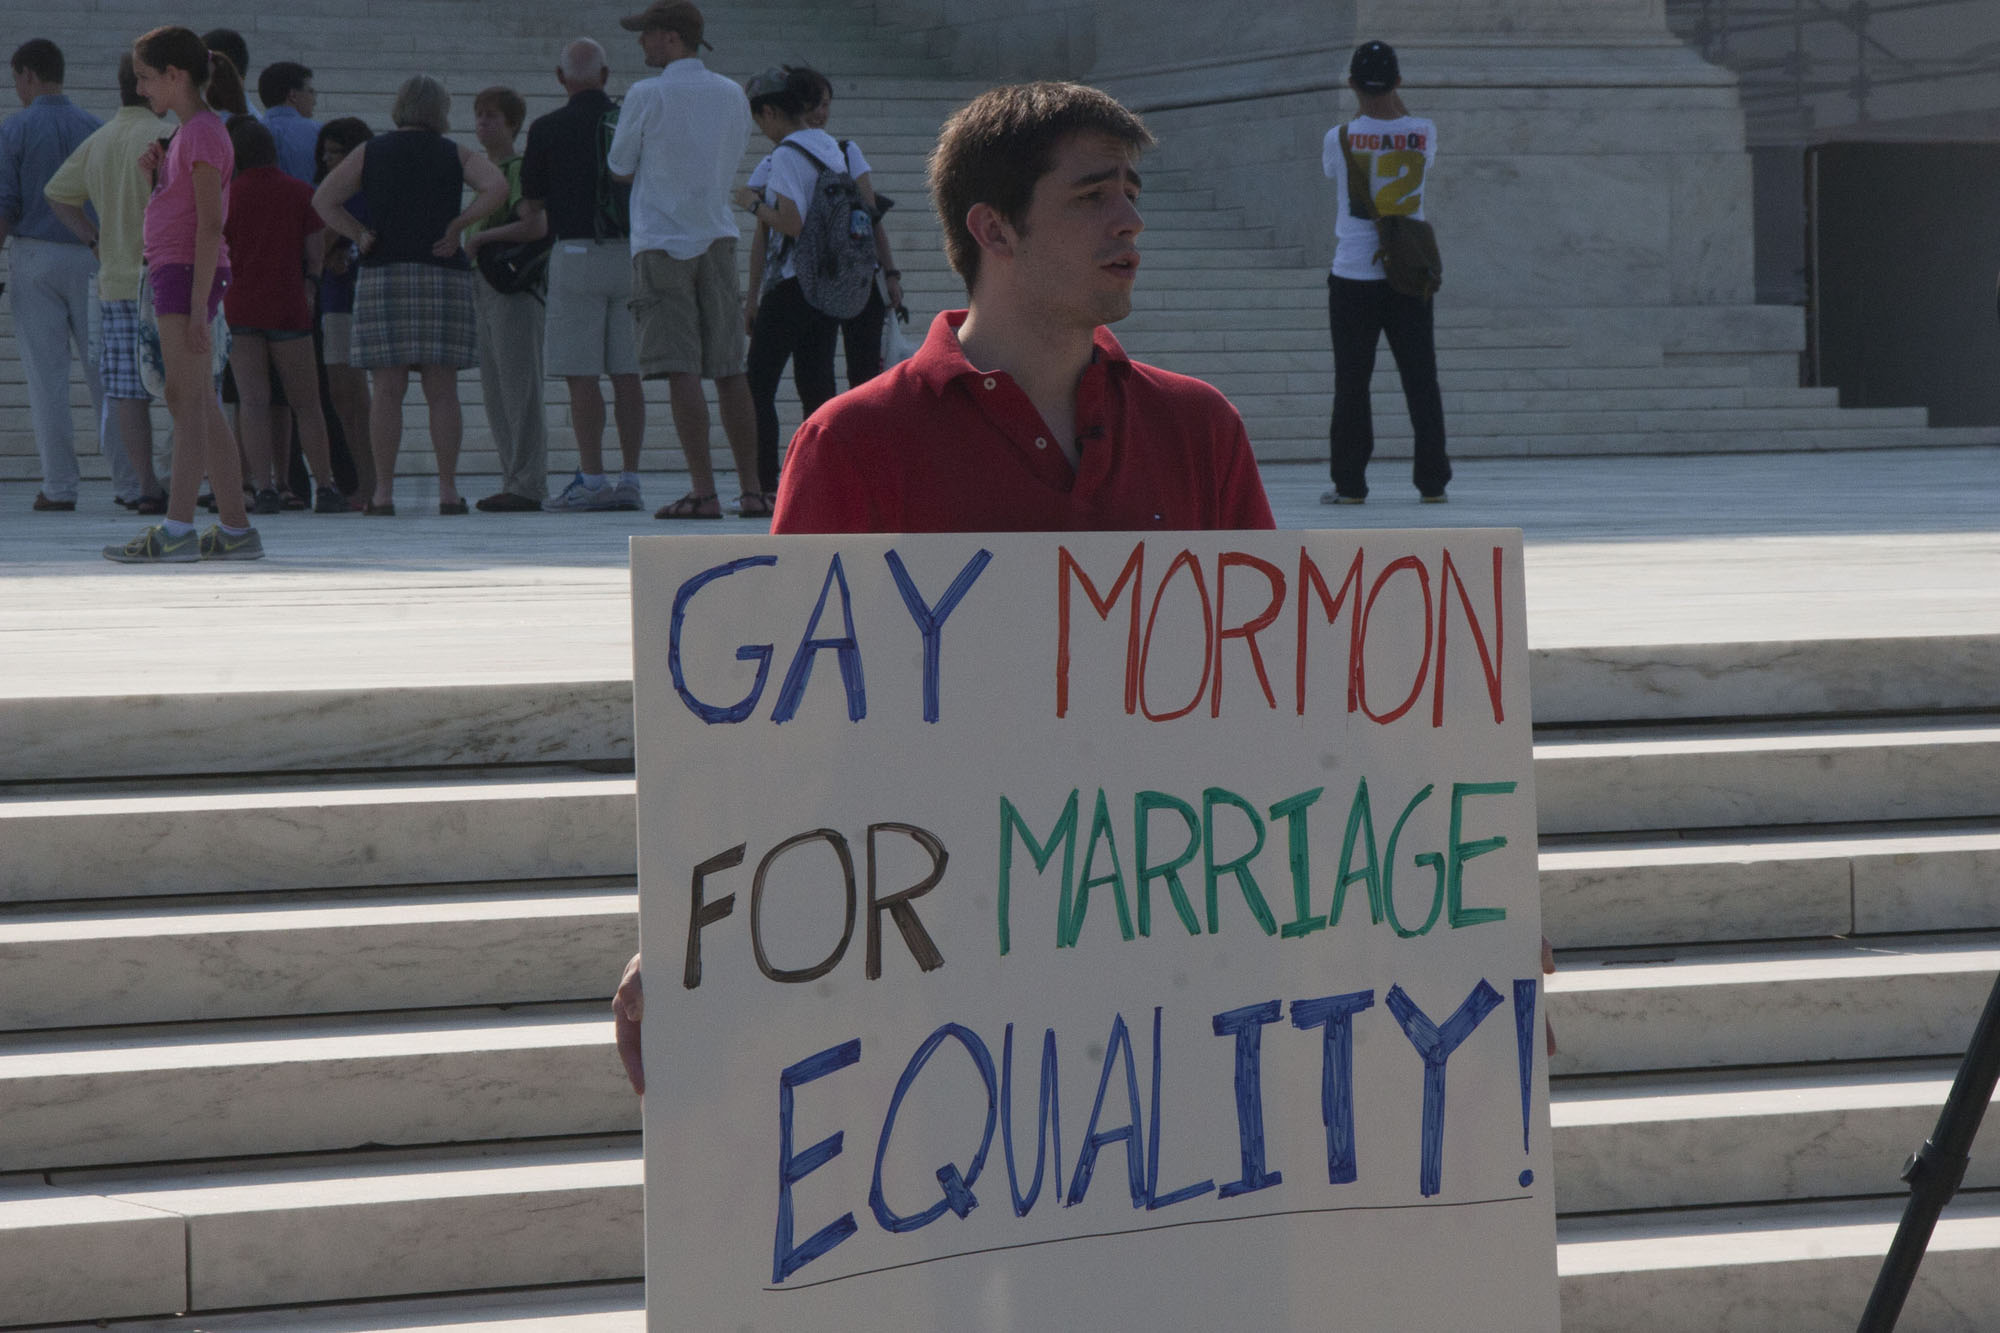 Advocates at Supreme Court ahead of samemarriage rulings